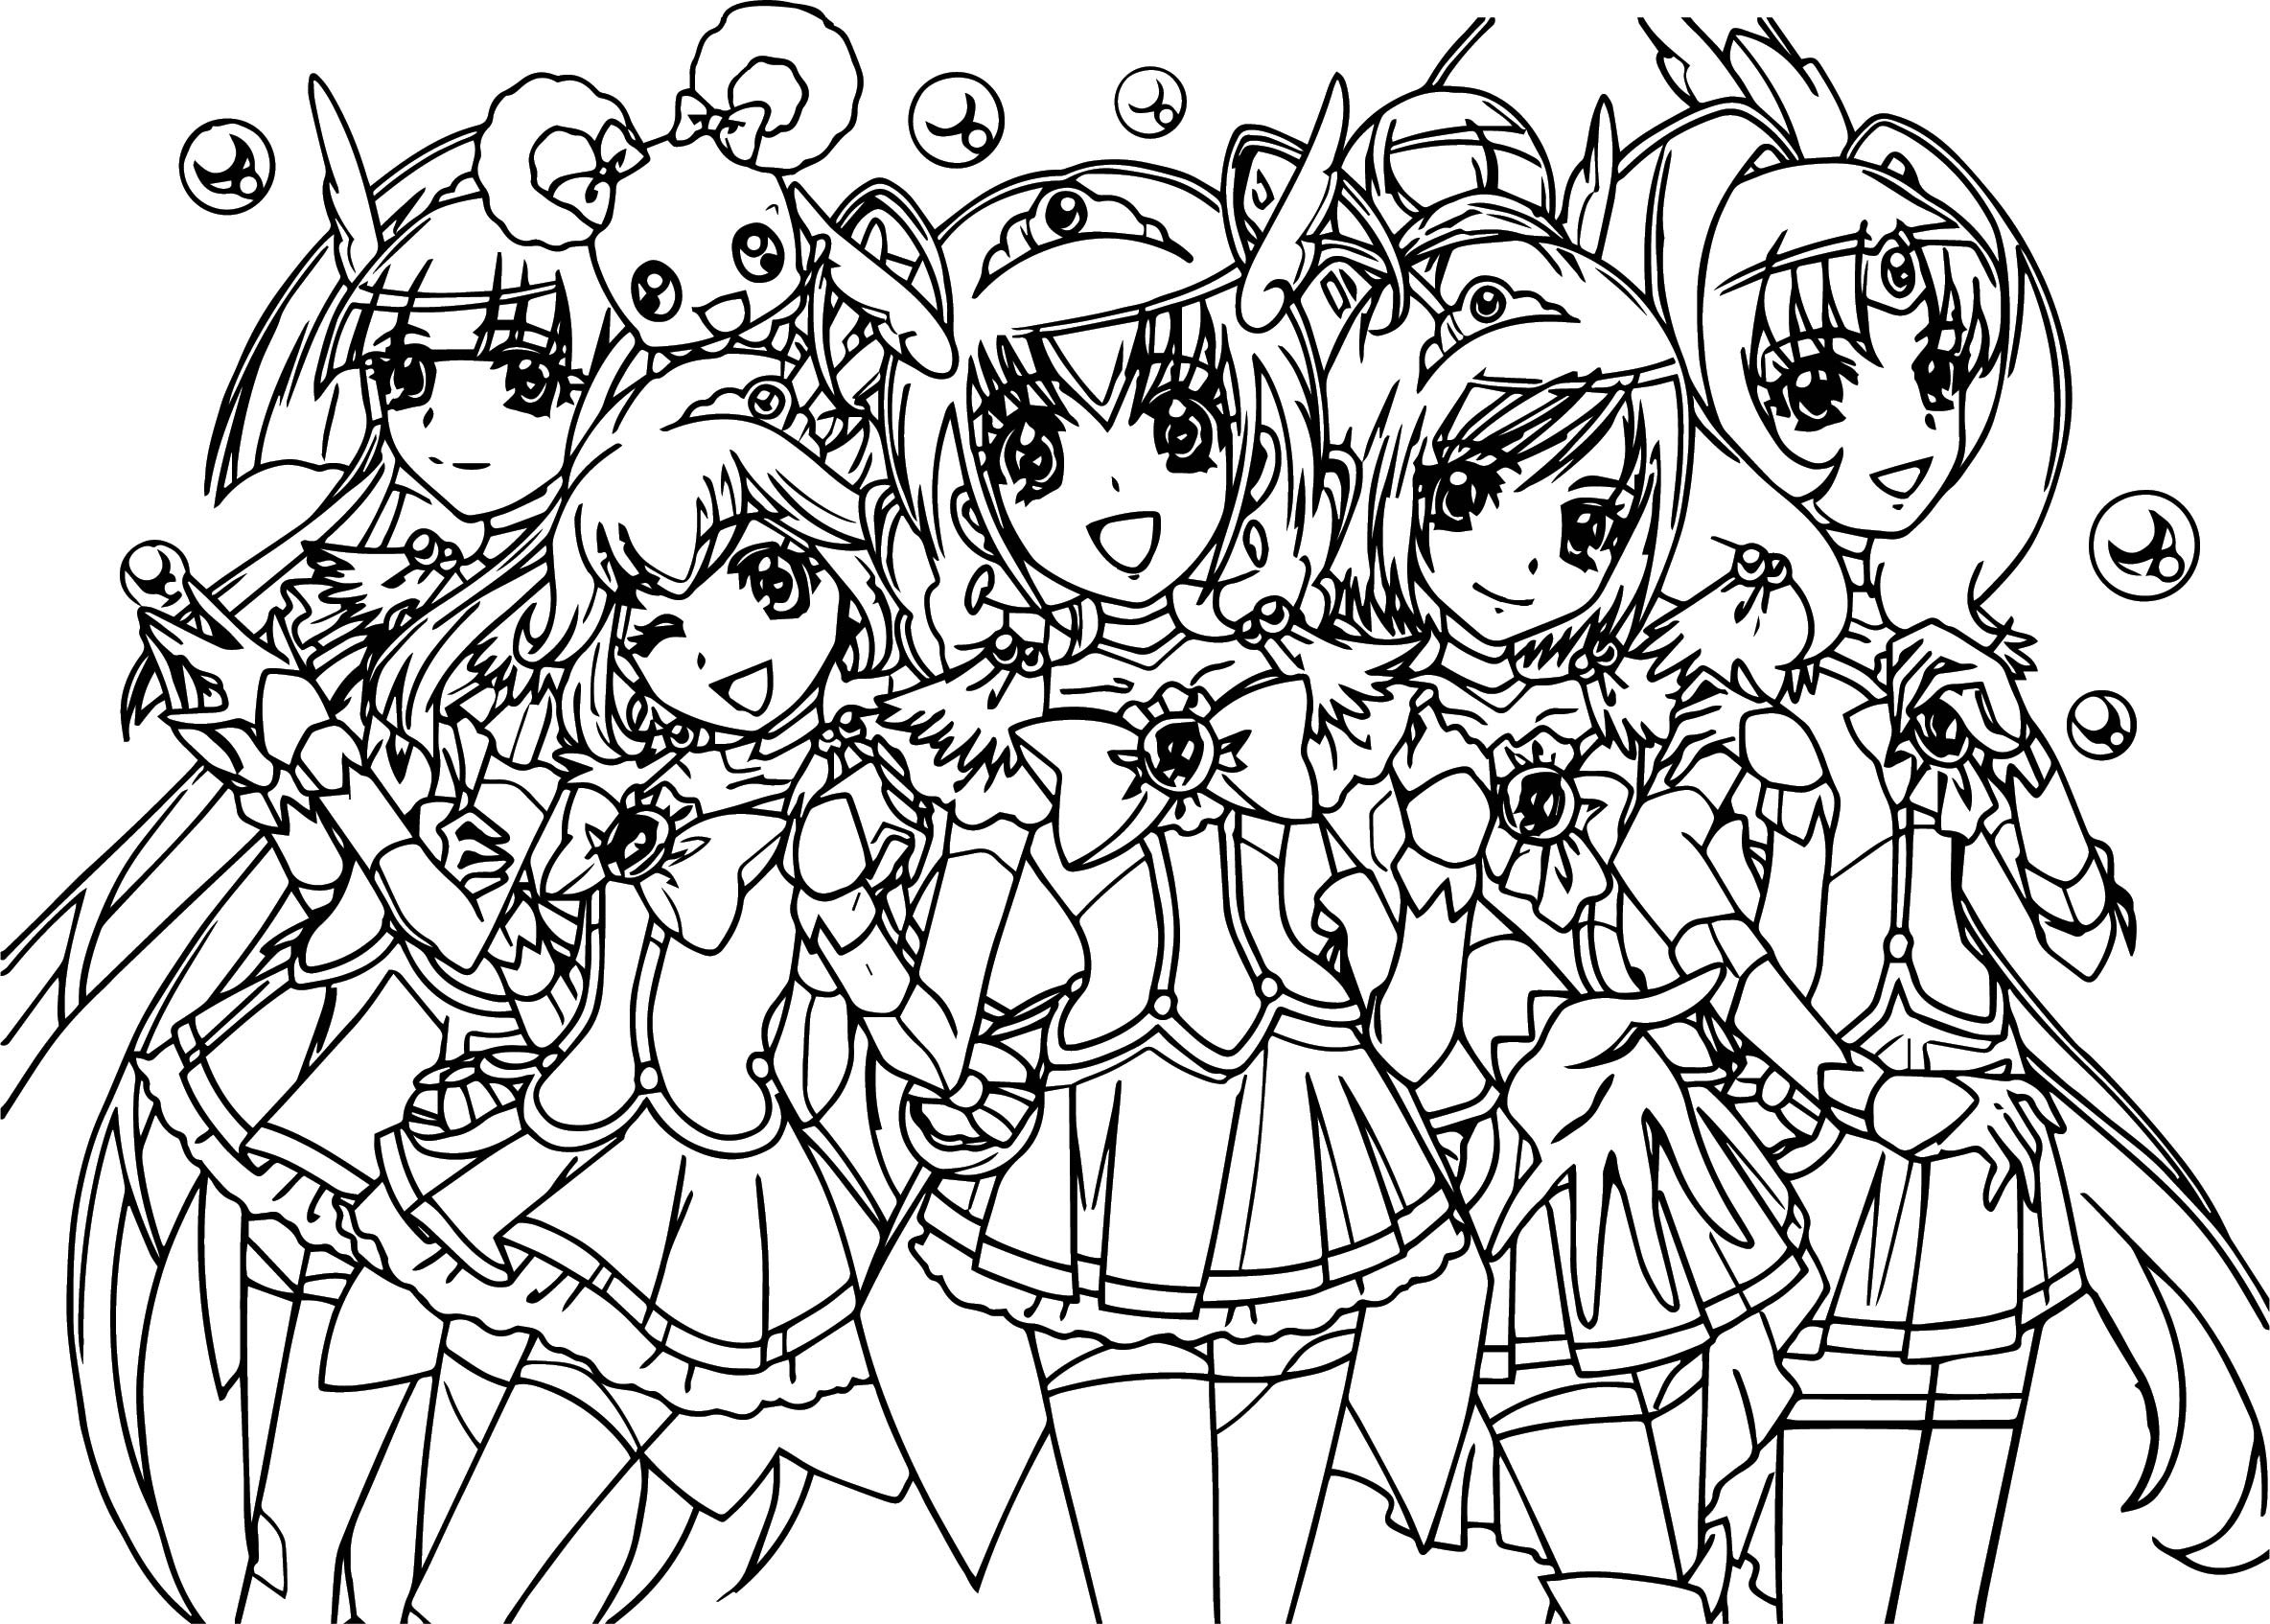 Glitter Force Coloring Pages Printable
 Smile Precure Glitter Force Team Coloring Page